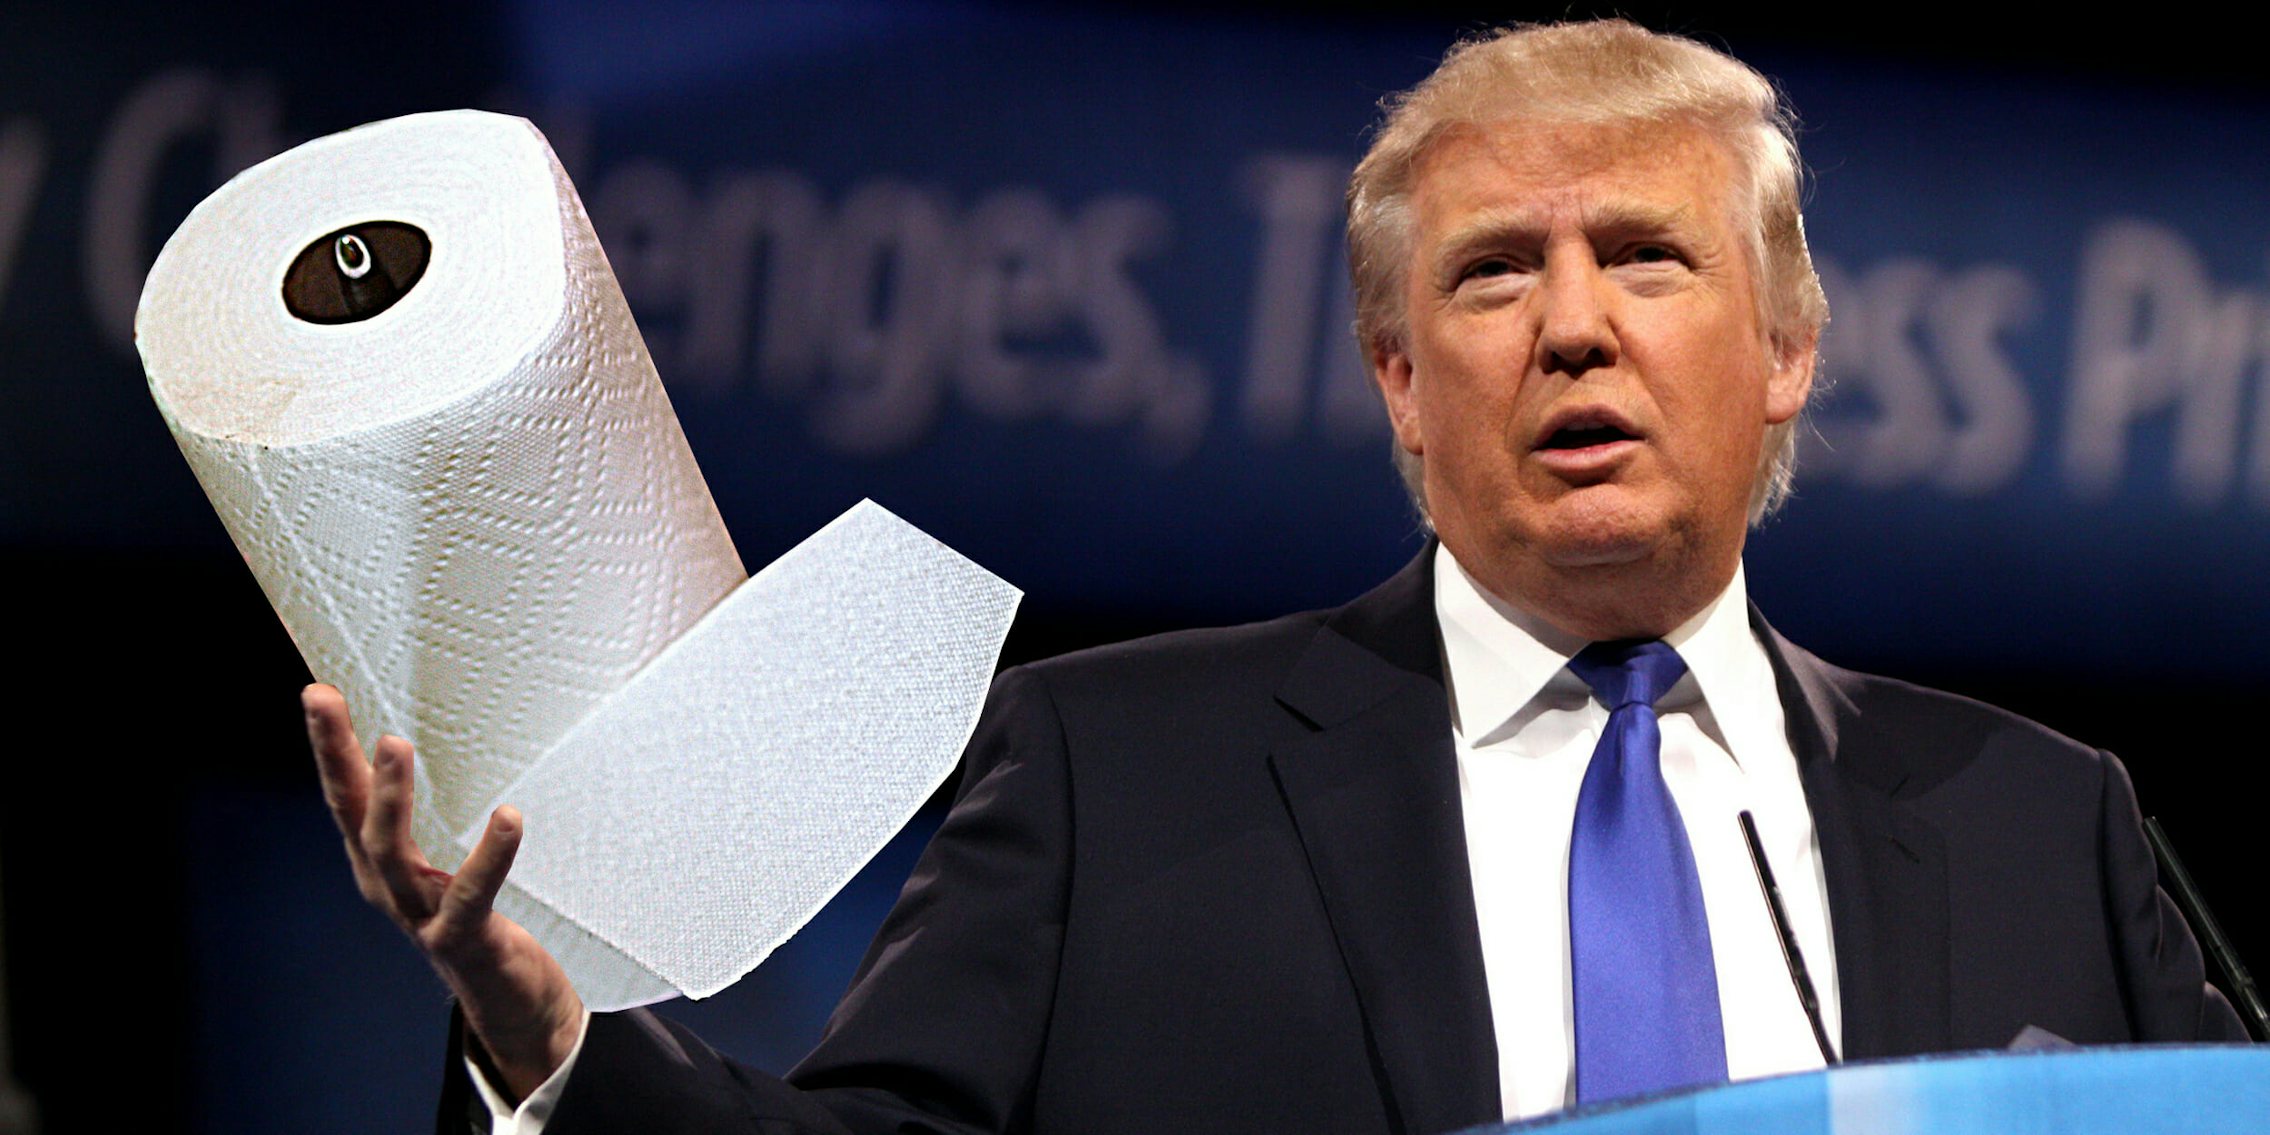 Trump threw paper towels at people in Puerto Rico.